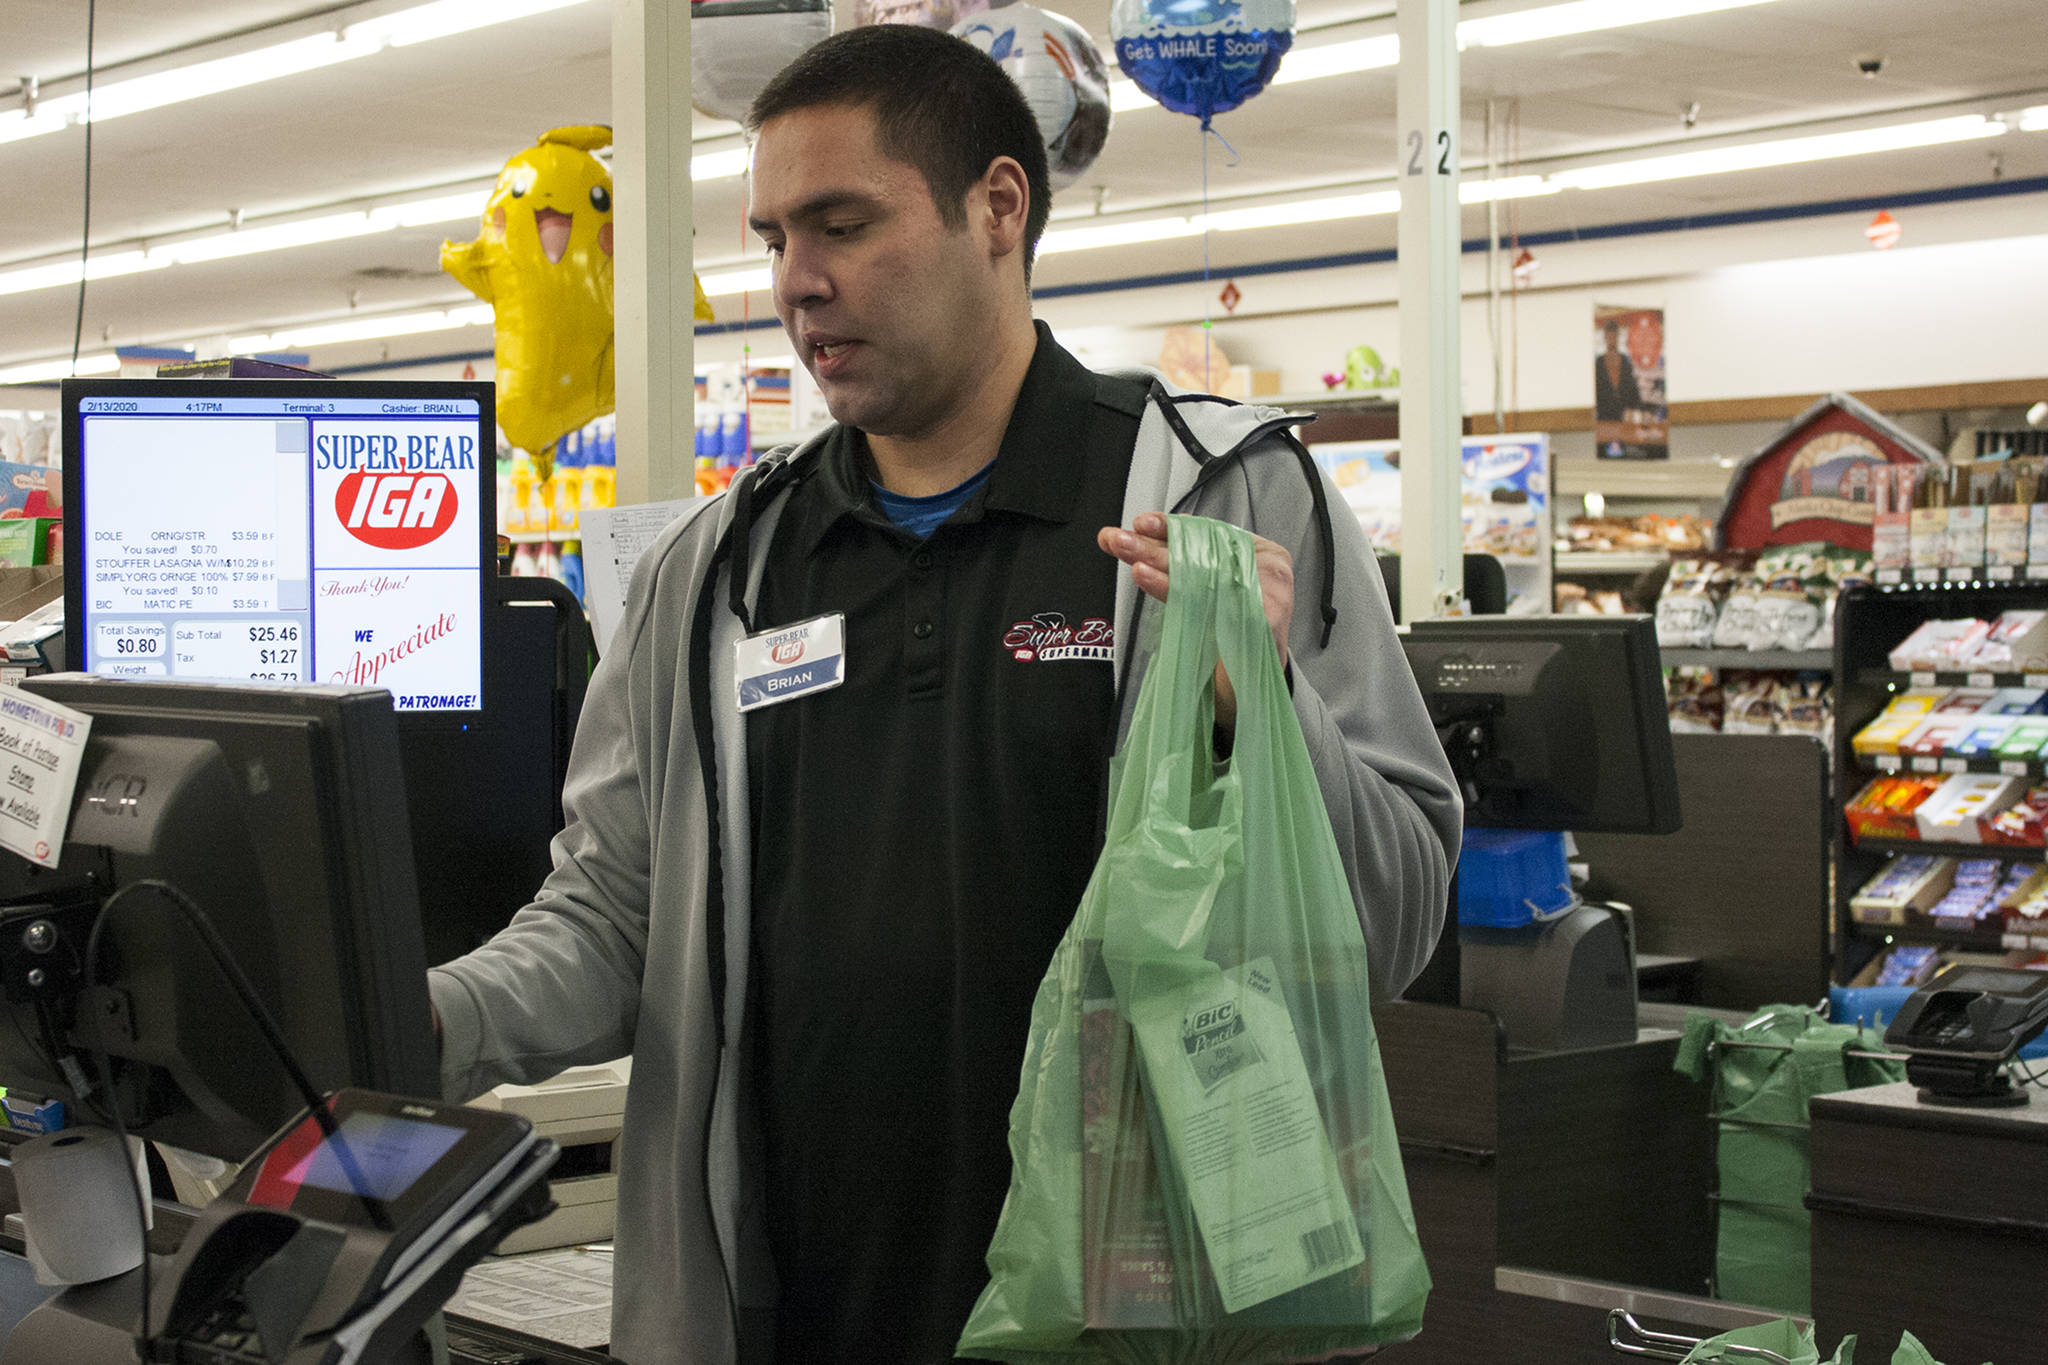 Brian Lauth, closing manager for Super Bear Supermarket IGA, bags groceries Thursday, Feb. 13, 2020. Super Bear will be collecting donations to ship food to Southeast Alaska communities impacted by a lack of ferry service. (Ben Hohenstatt | Juneau Empire)